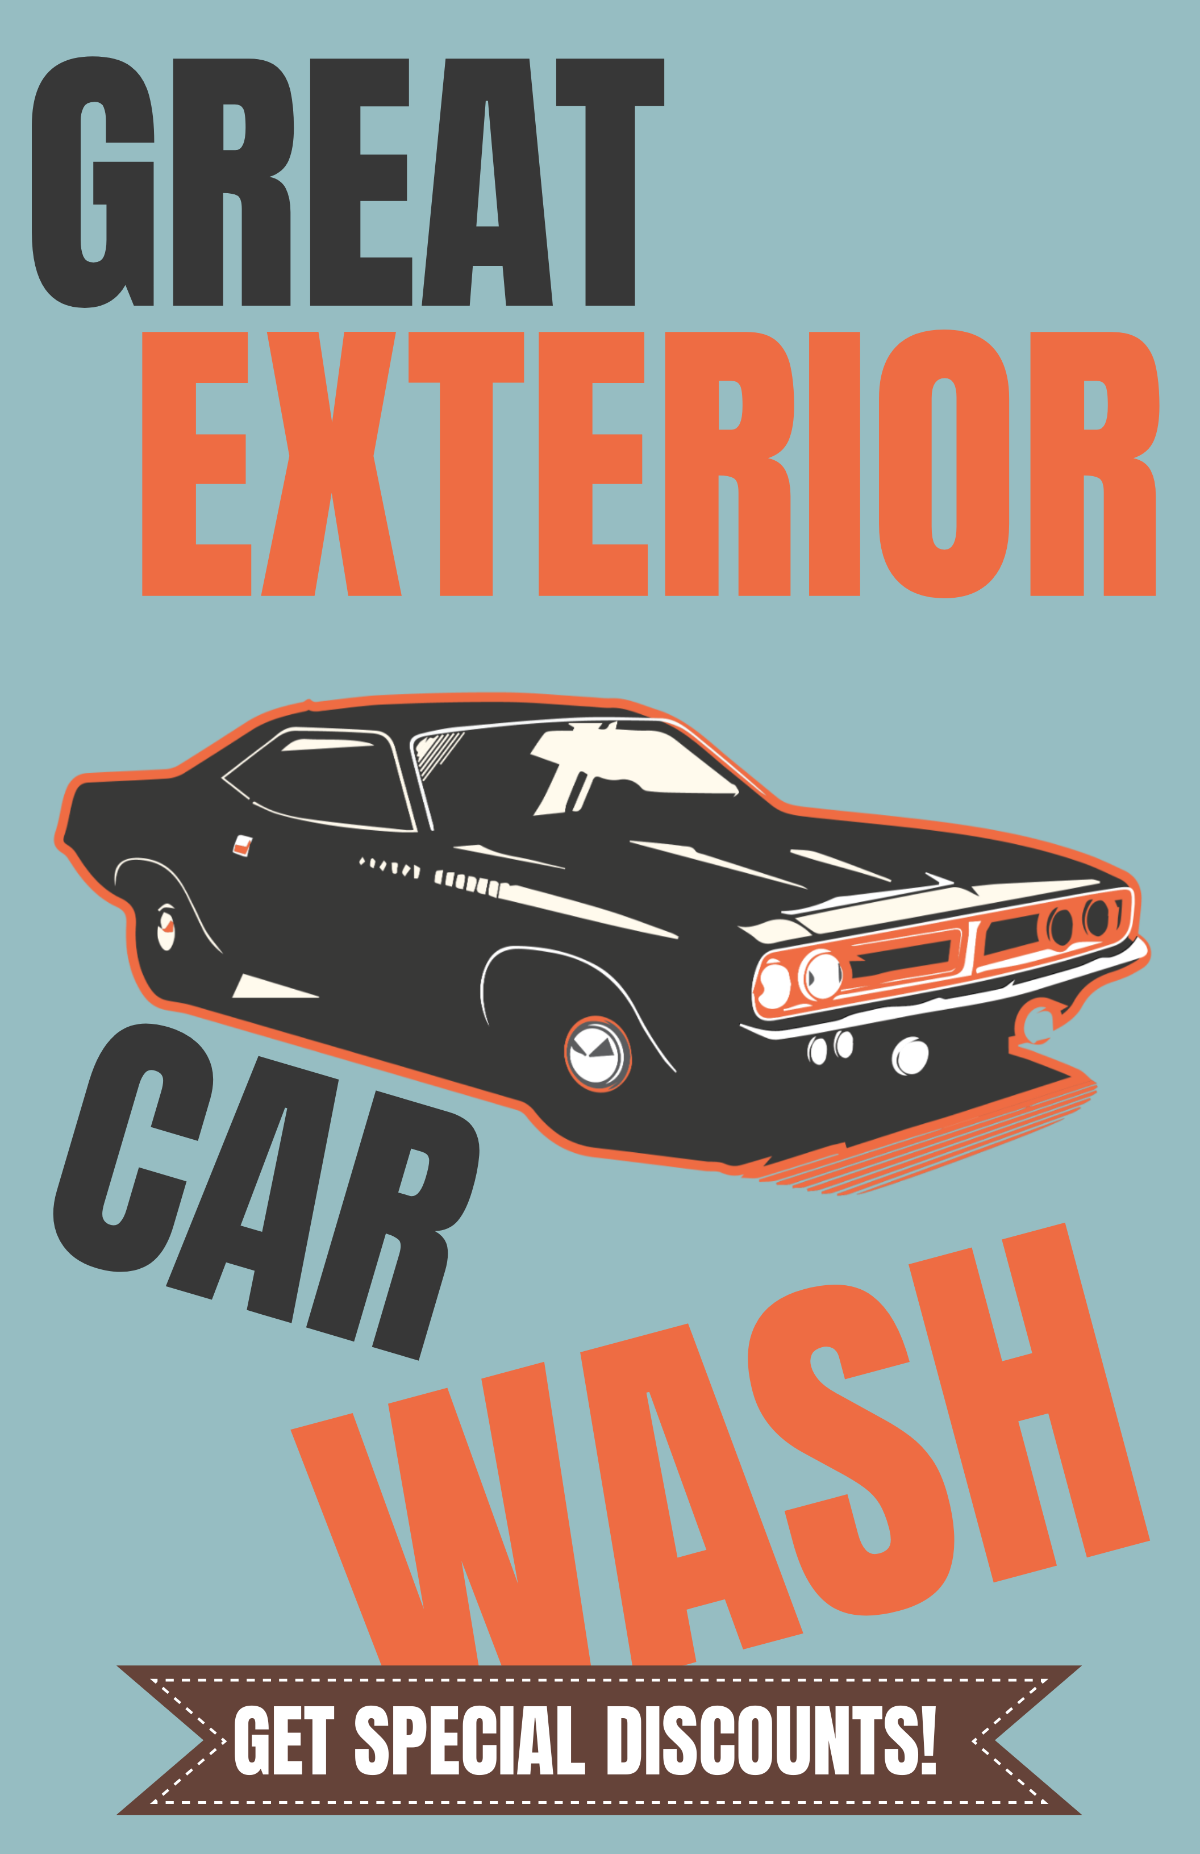 Free Colorful Car Wash Poster Template